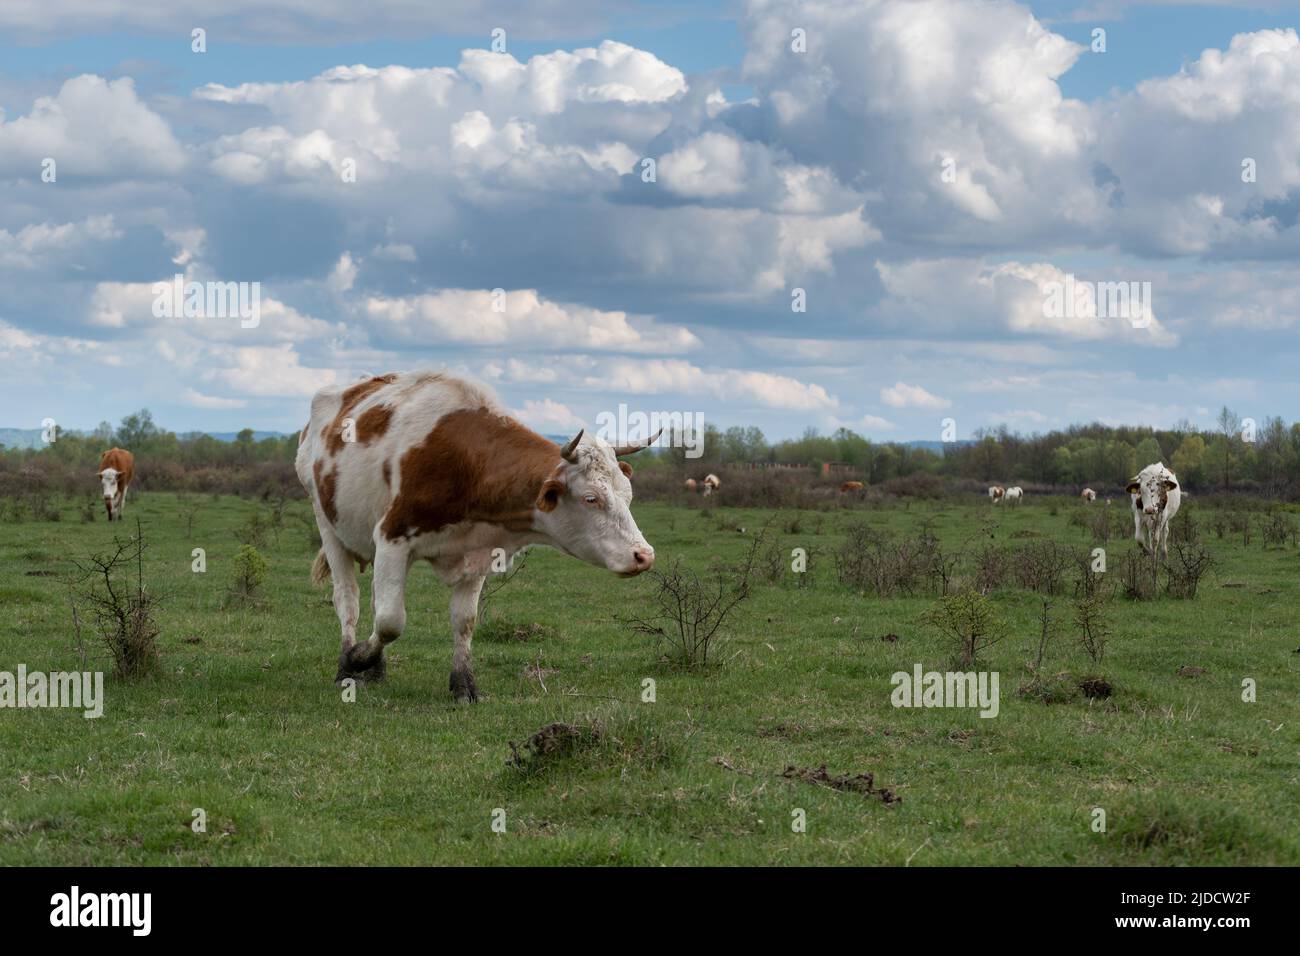 Cow walks through field with small shrubs, front view of domestic animal in pasture on cloudy day Stock Photo